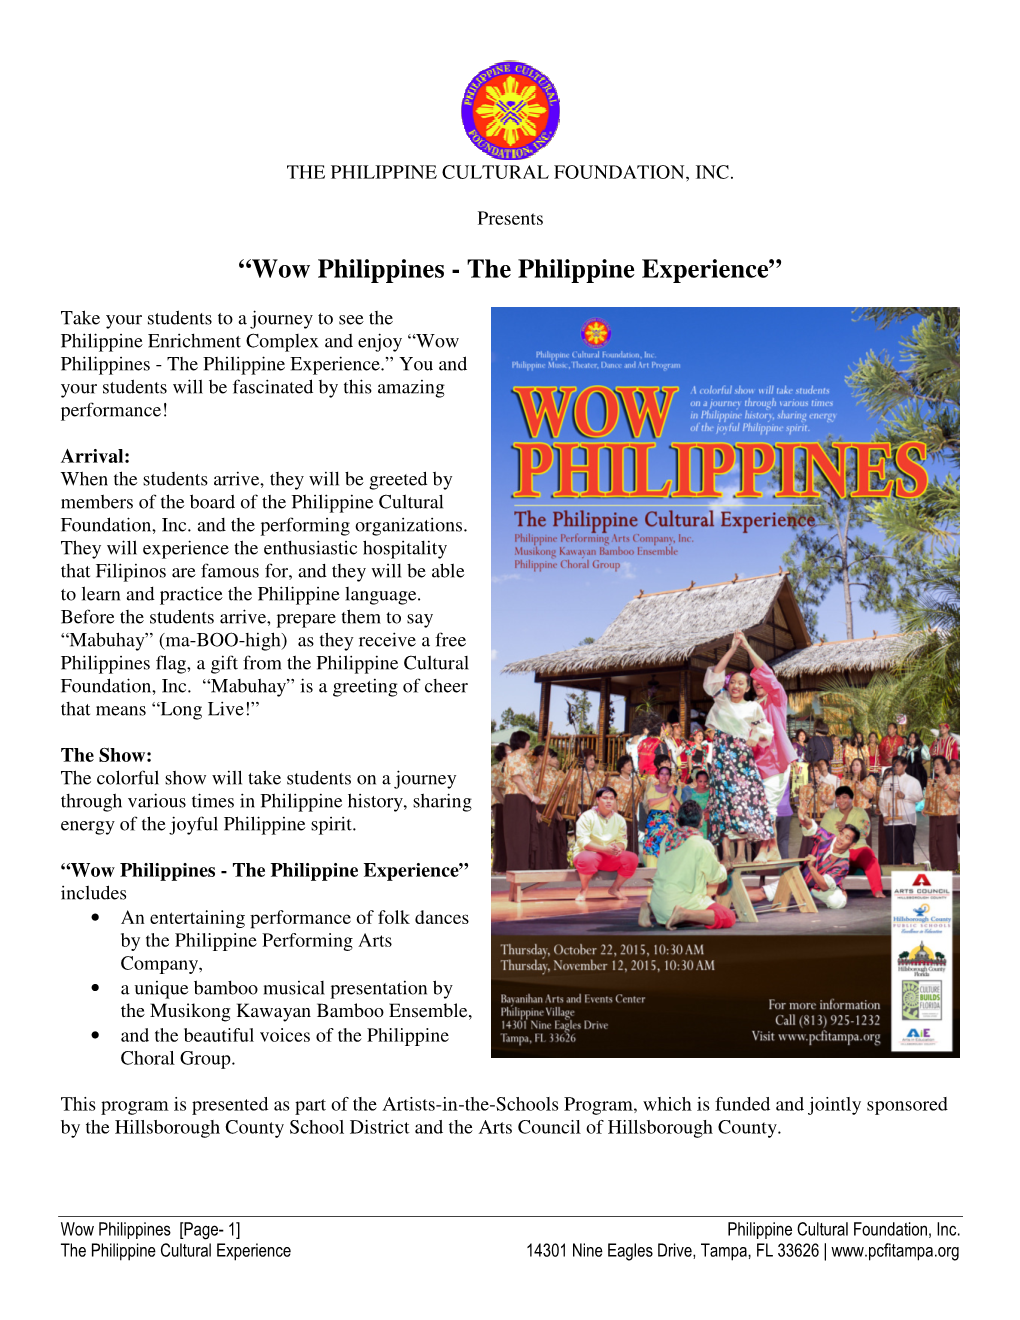 “Wow Philippines - the Philippine Experience”